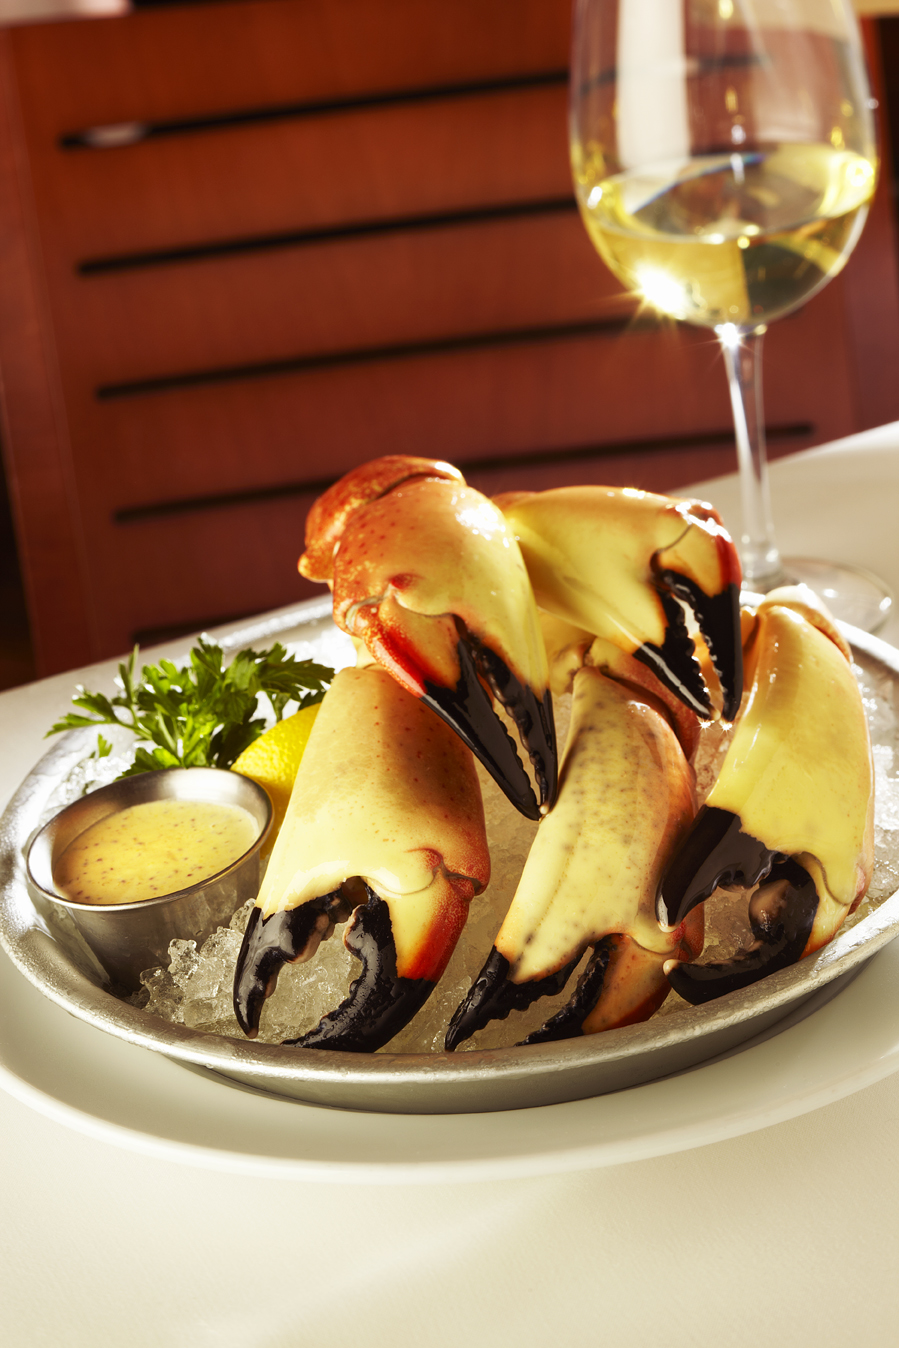 Ocean Prime presents  Stone Crab Claws for a limited time